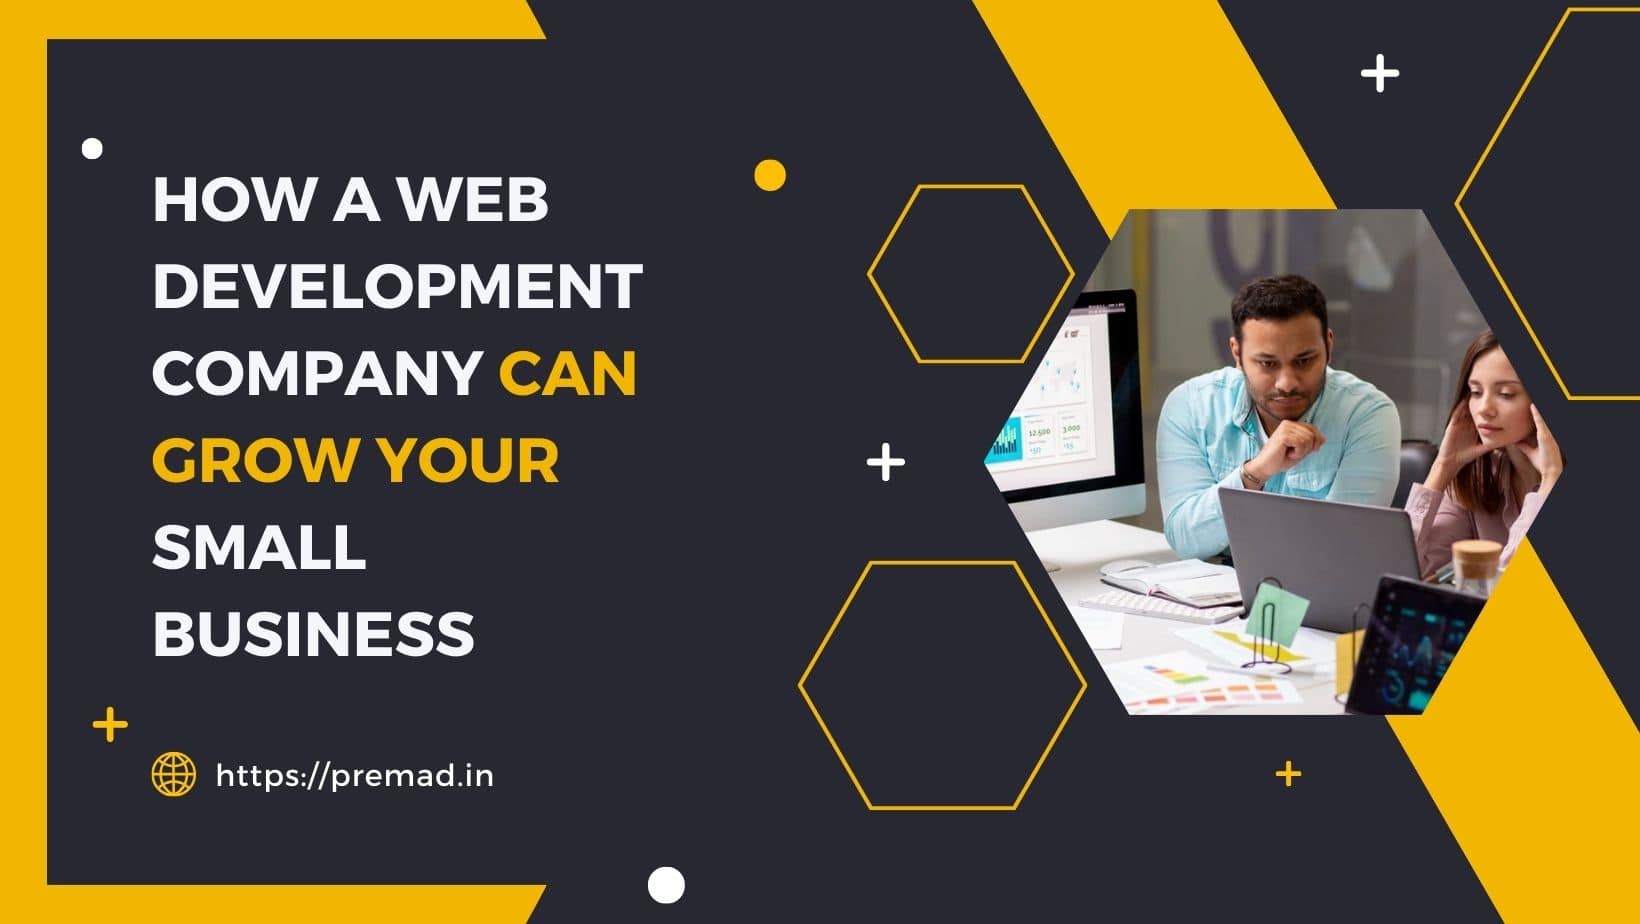 How A Web Development Company Can Grow Your Small Business